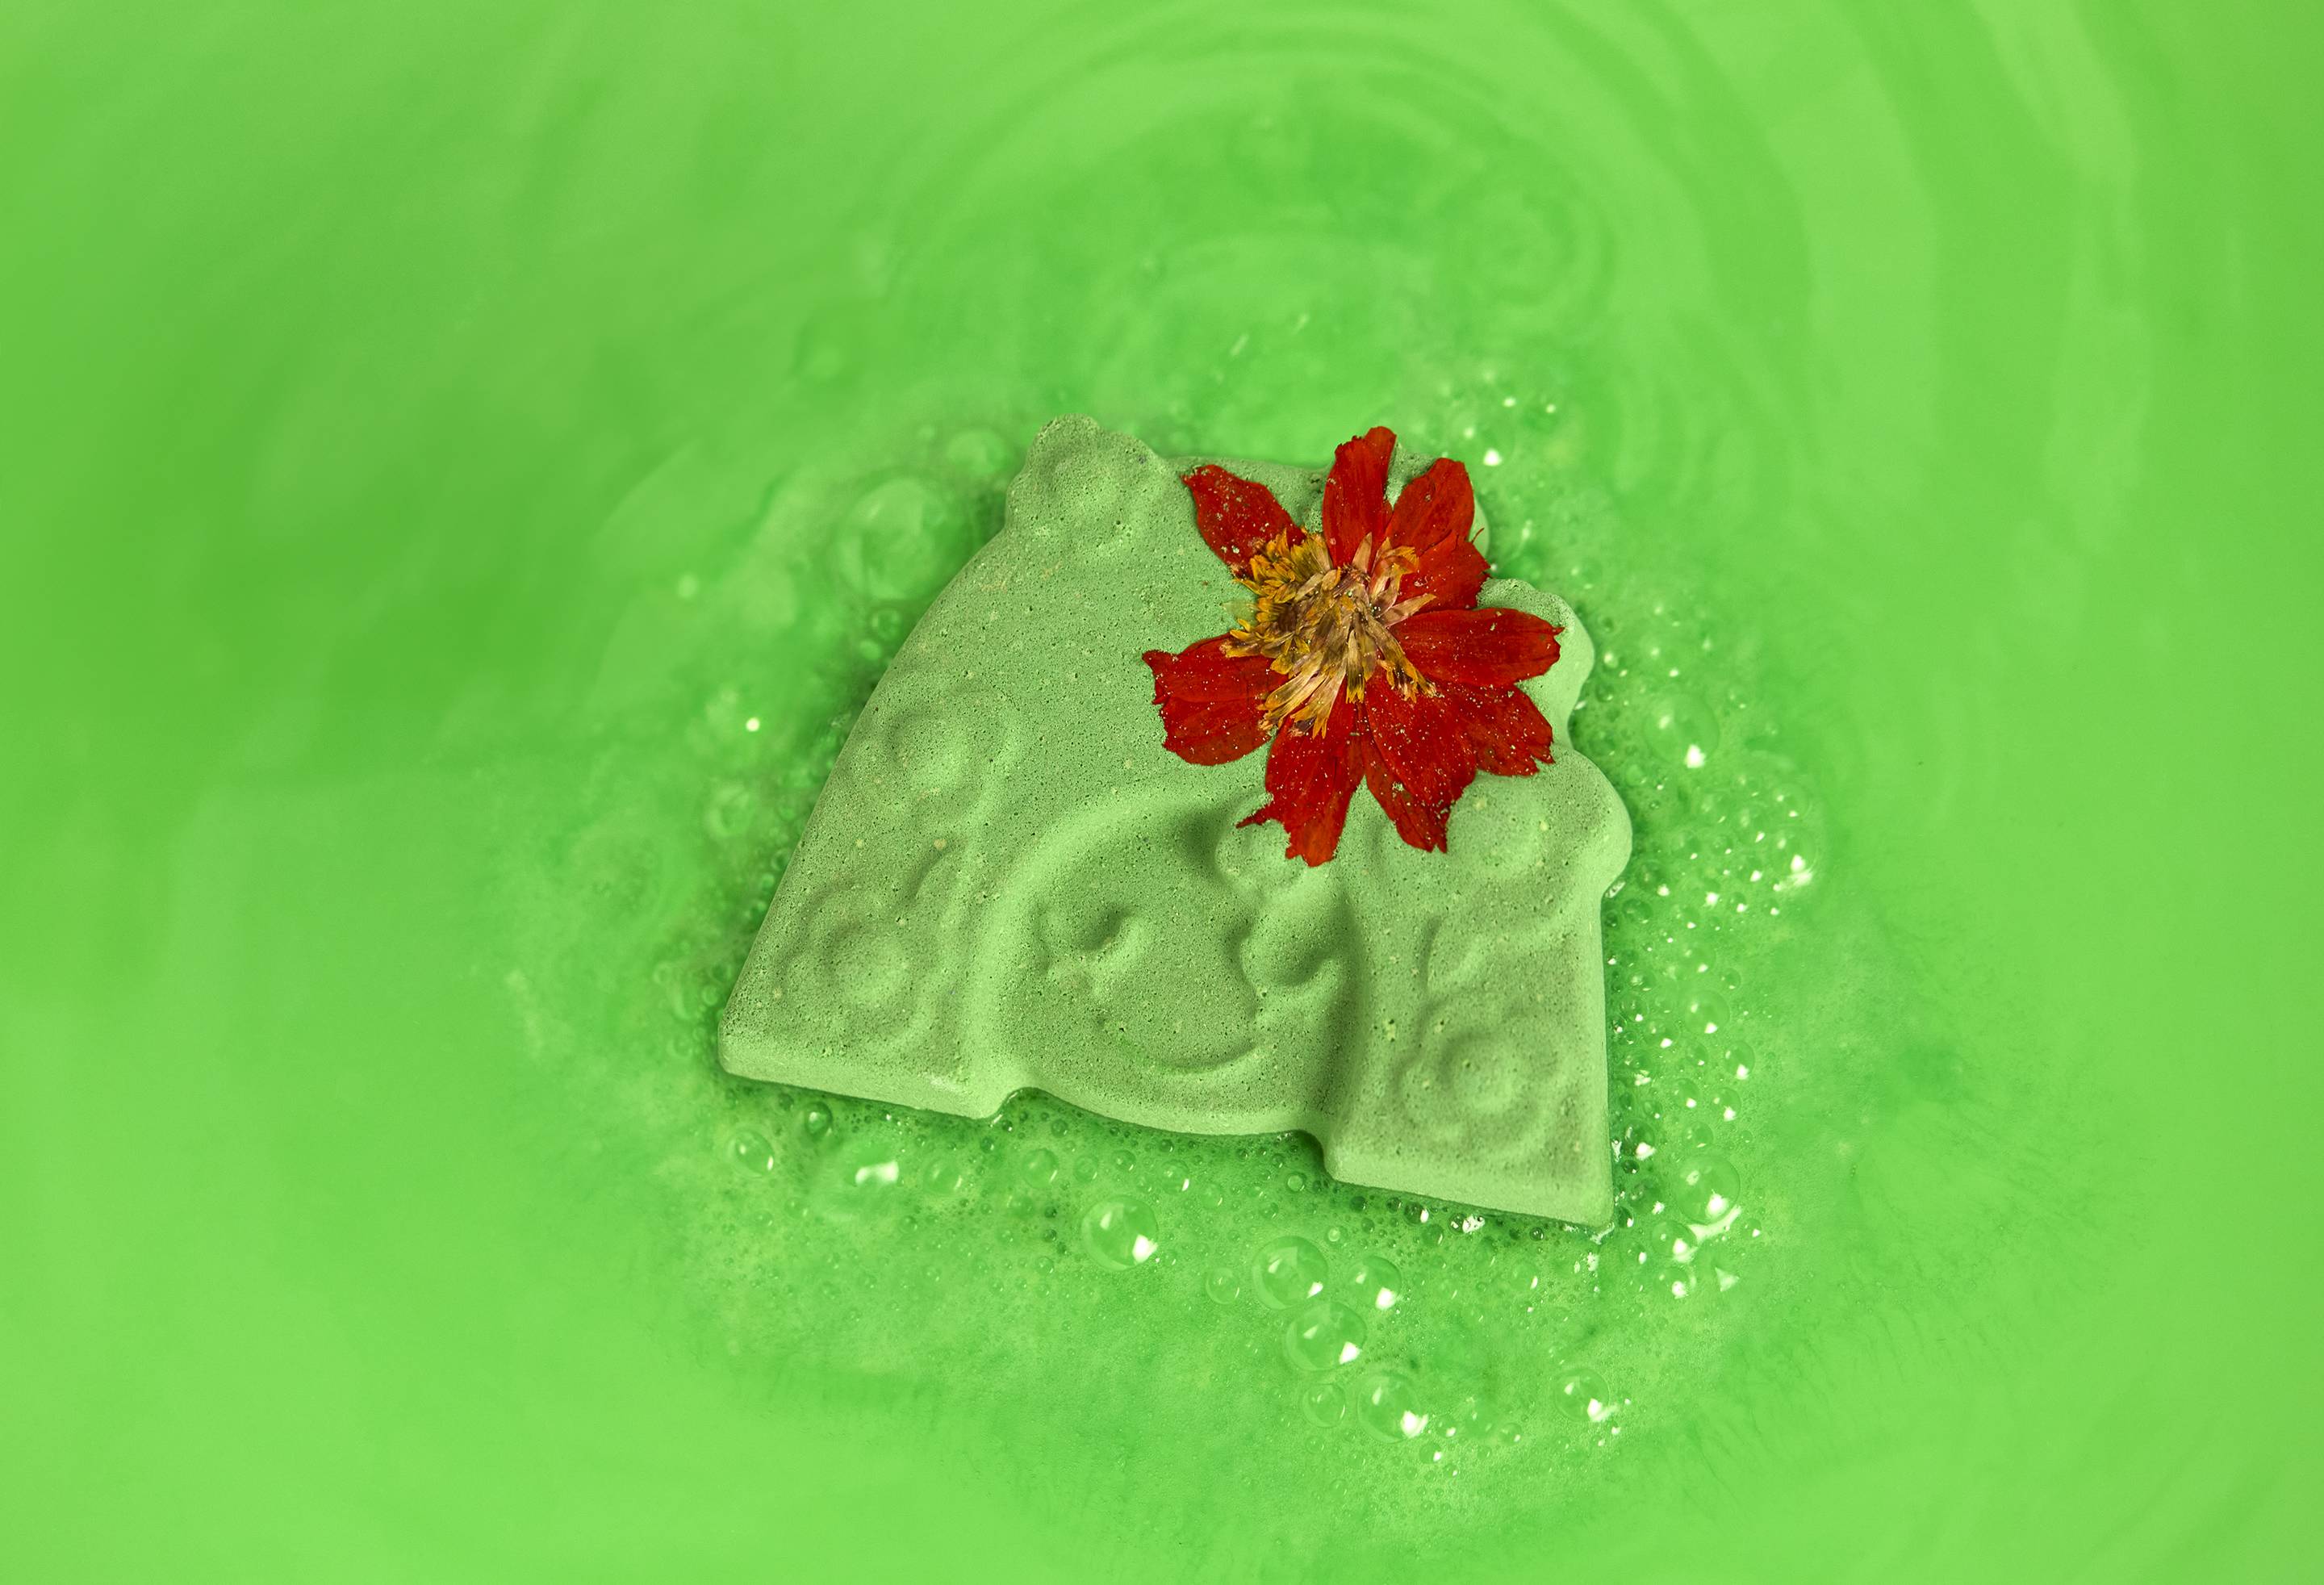 The Mother Nature bath bomb sits, dissolving and creating vibrant, neon-green bath water. 